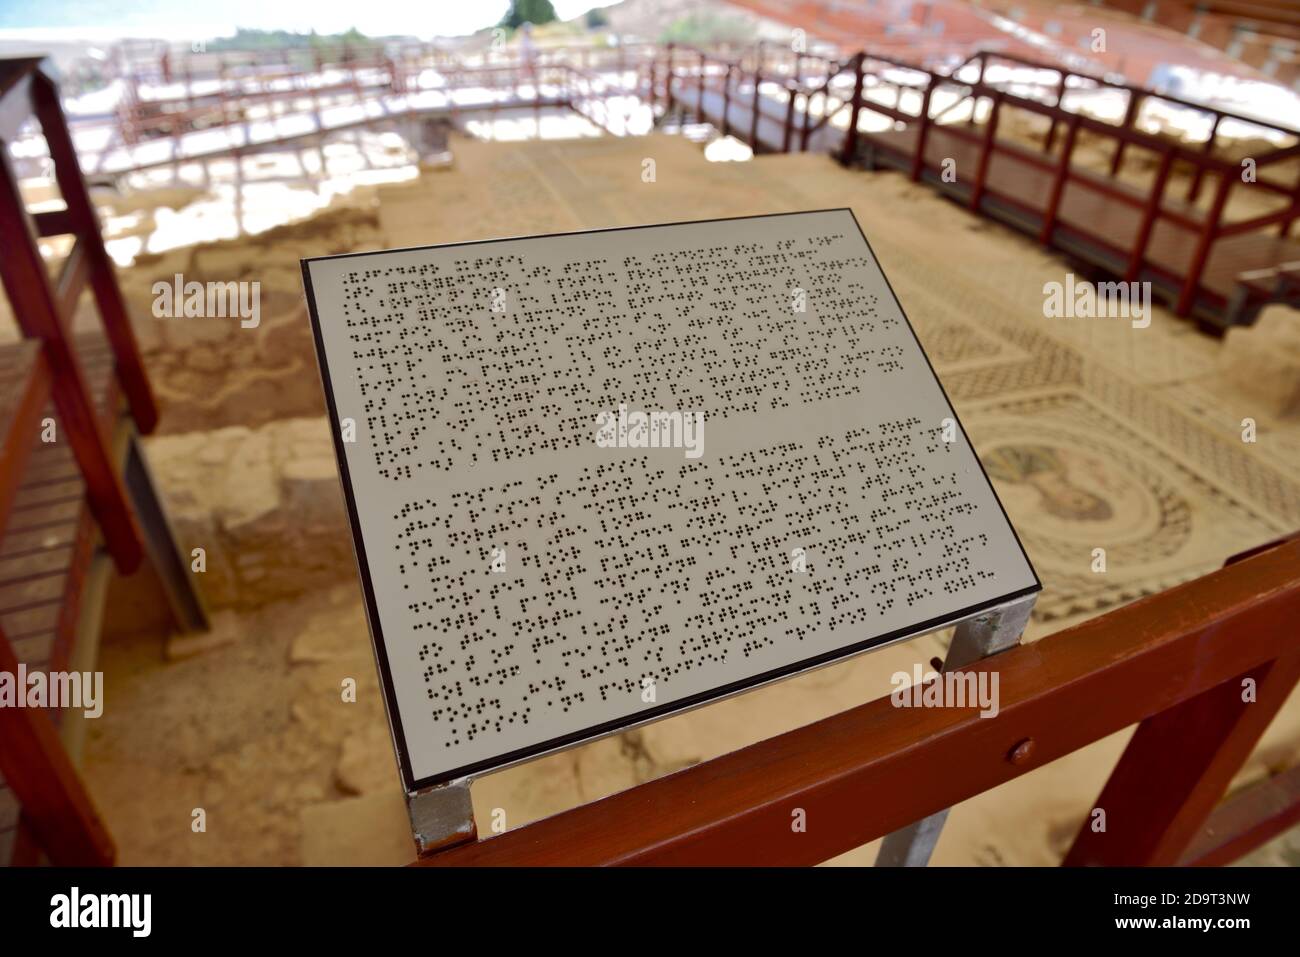 Information sign written in Braille for blind or partially sighted at “House of Eustolios”, Kourion Archaeological Site, Cyprus Stock Photo